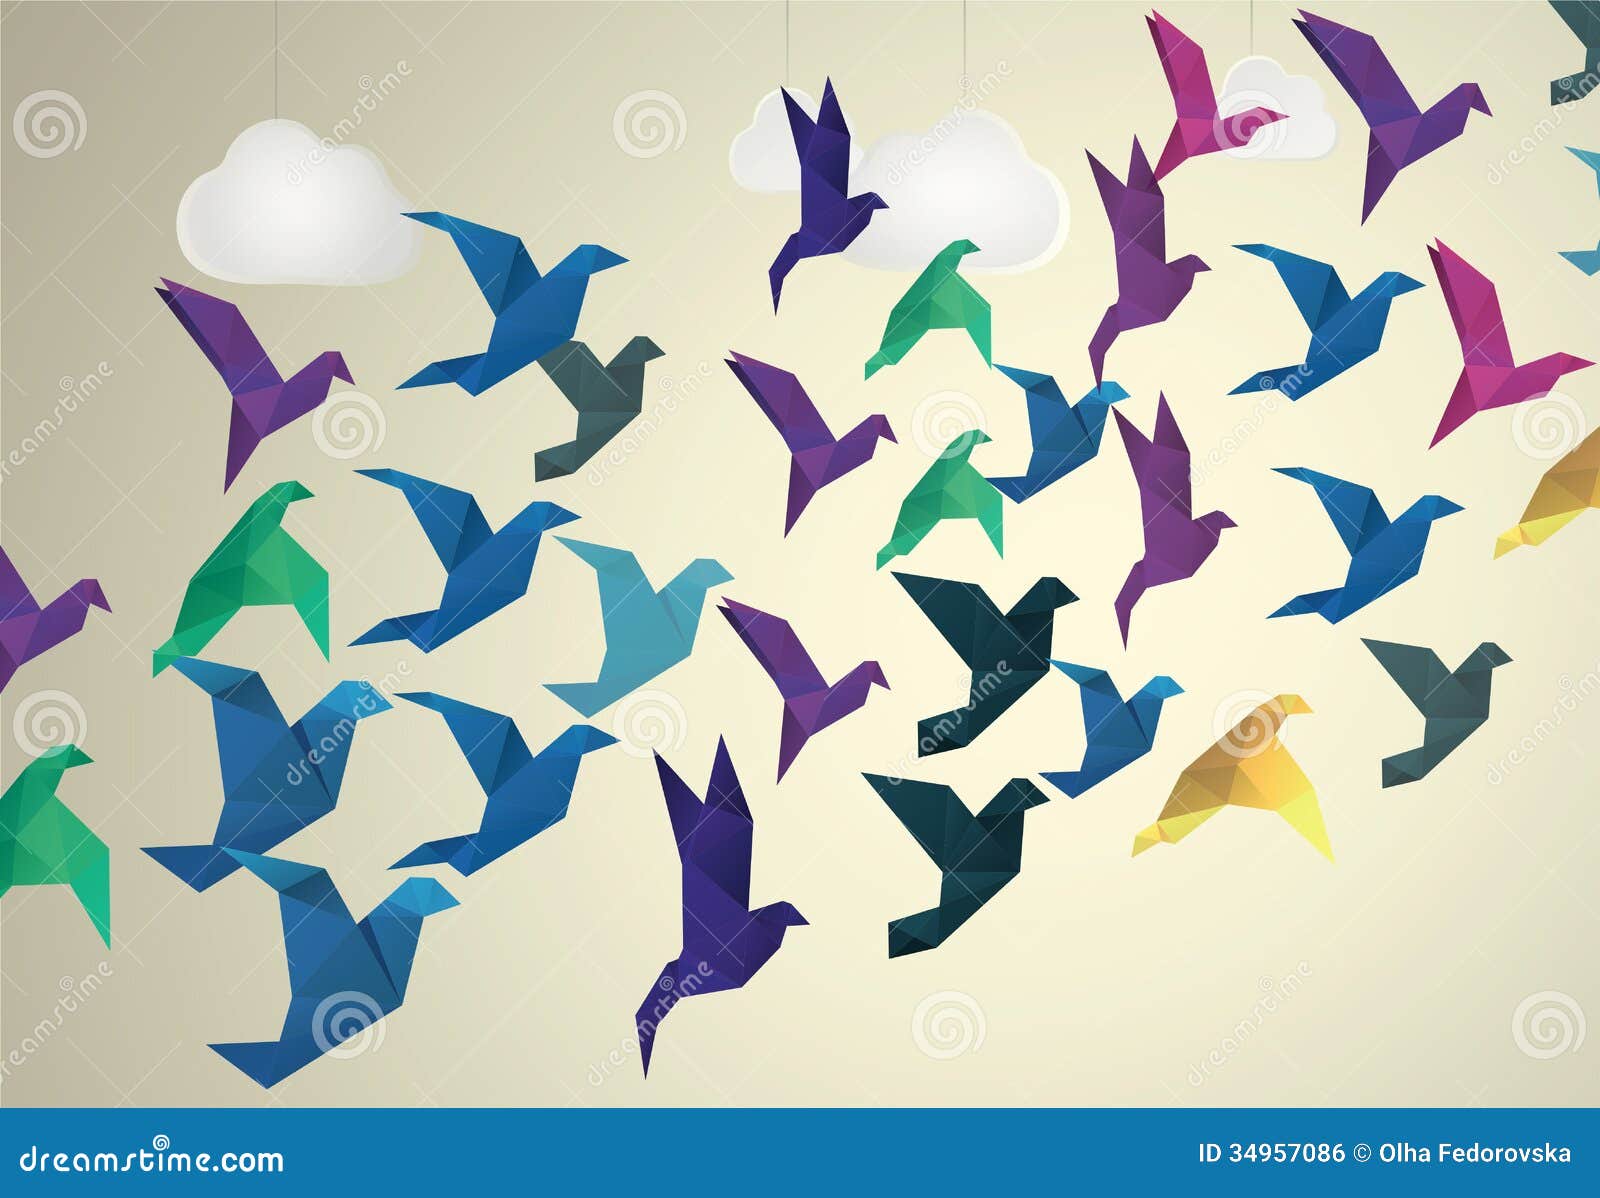 Origami Birds Flying And Fake Clouds Stock Vector